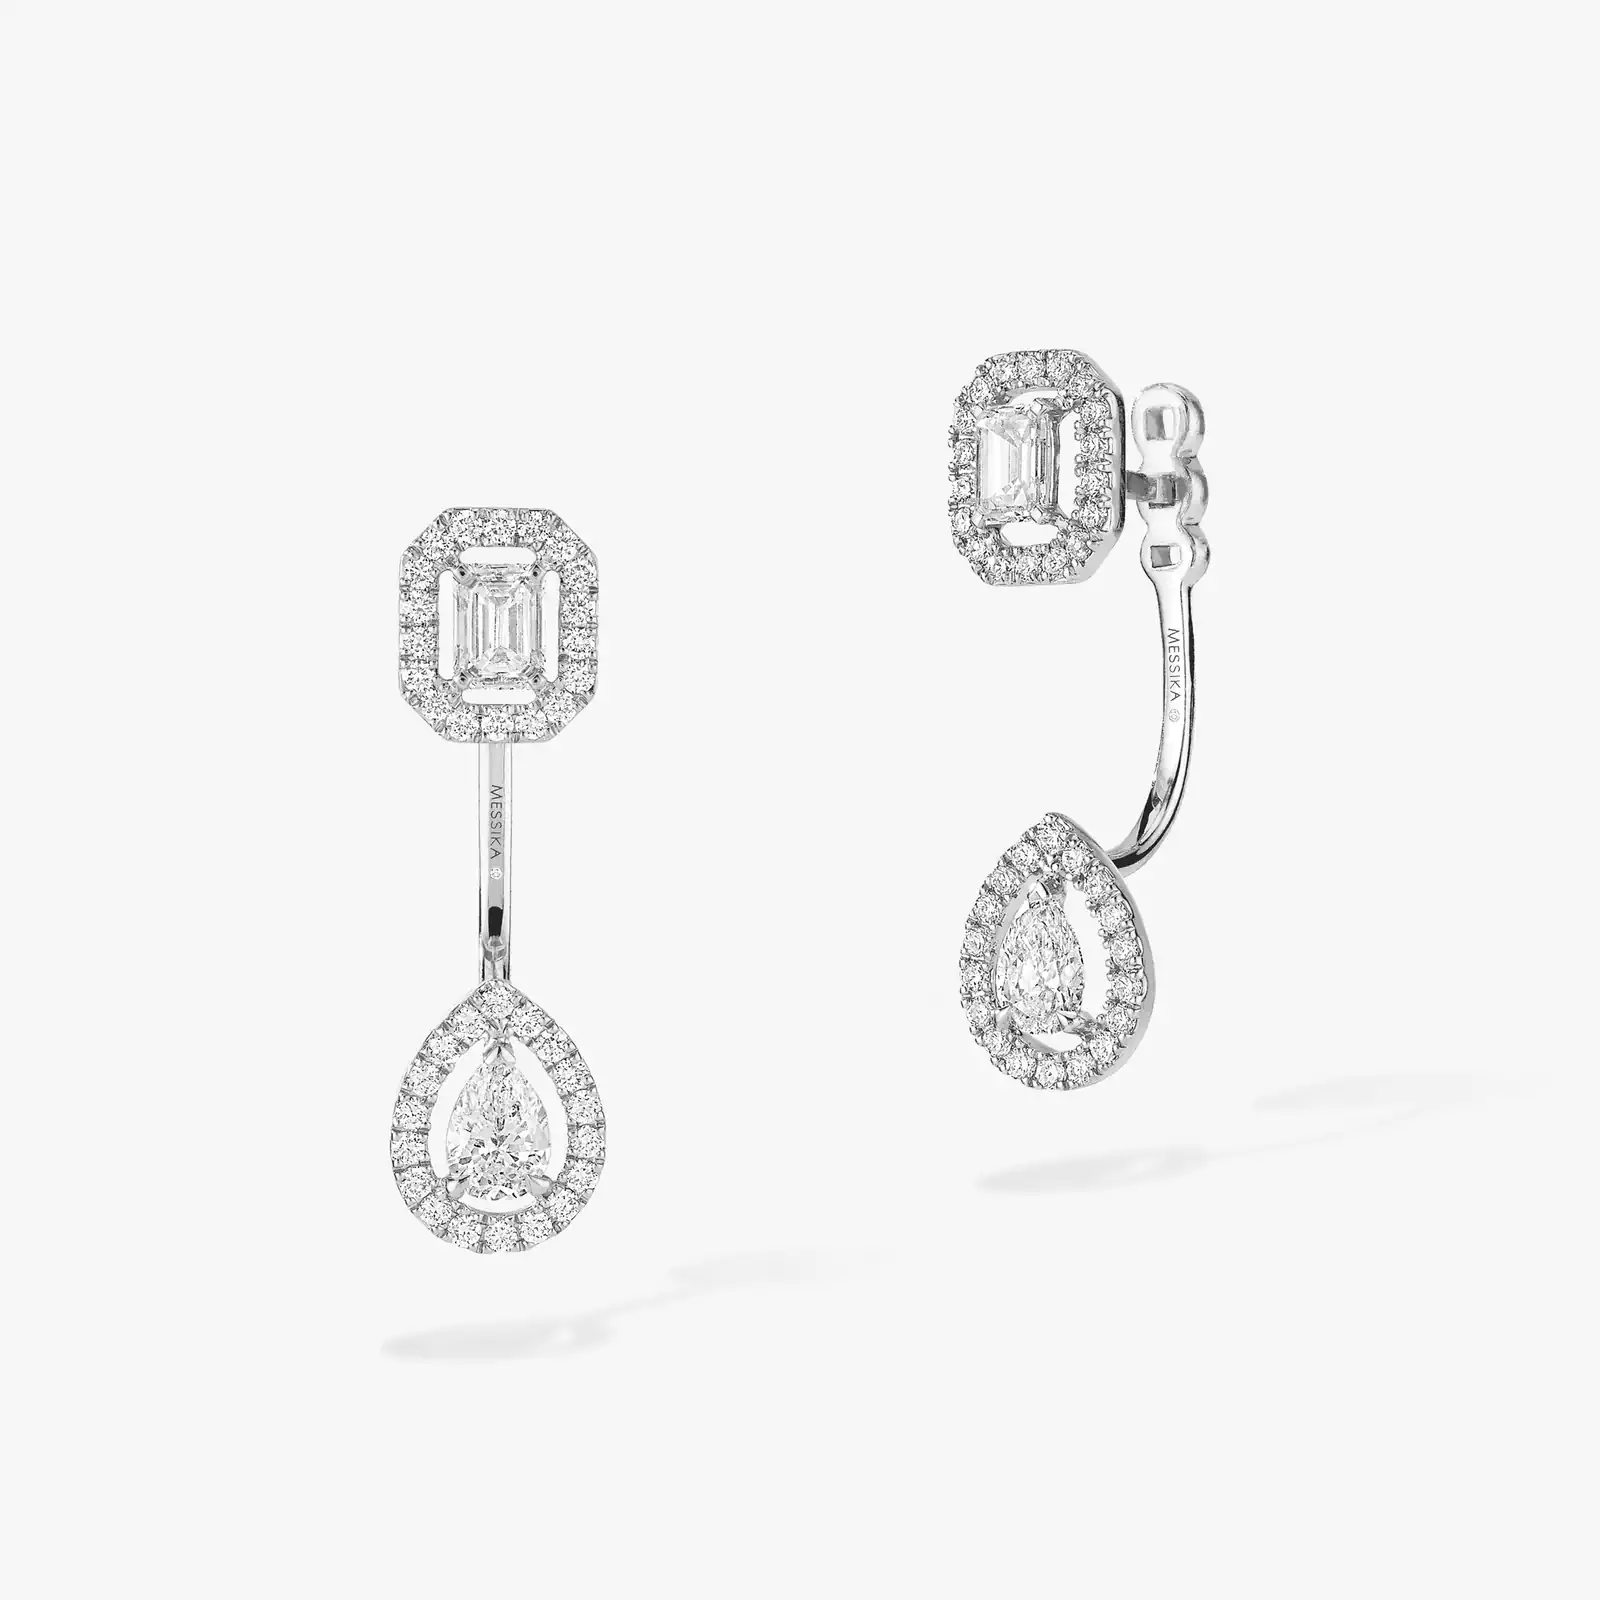 Earrings For Her White Gold Diamond My Twin Toi & Moi 0.15ct x2 06504-WG